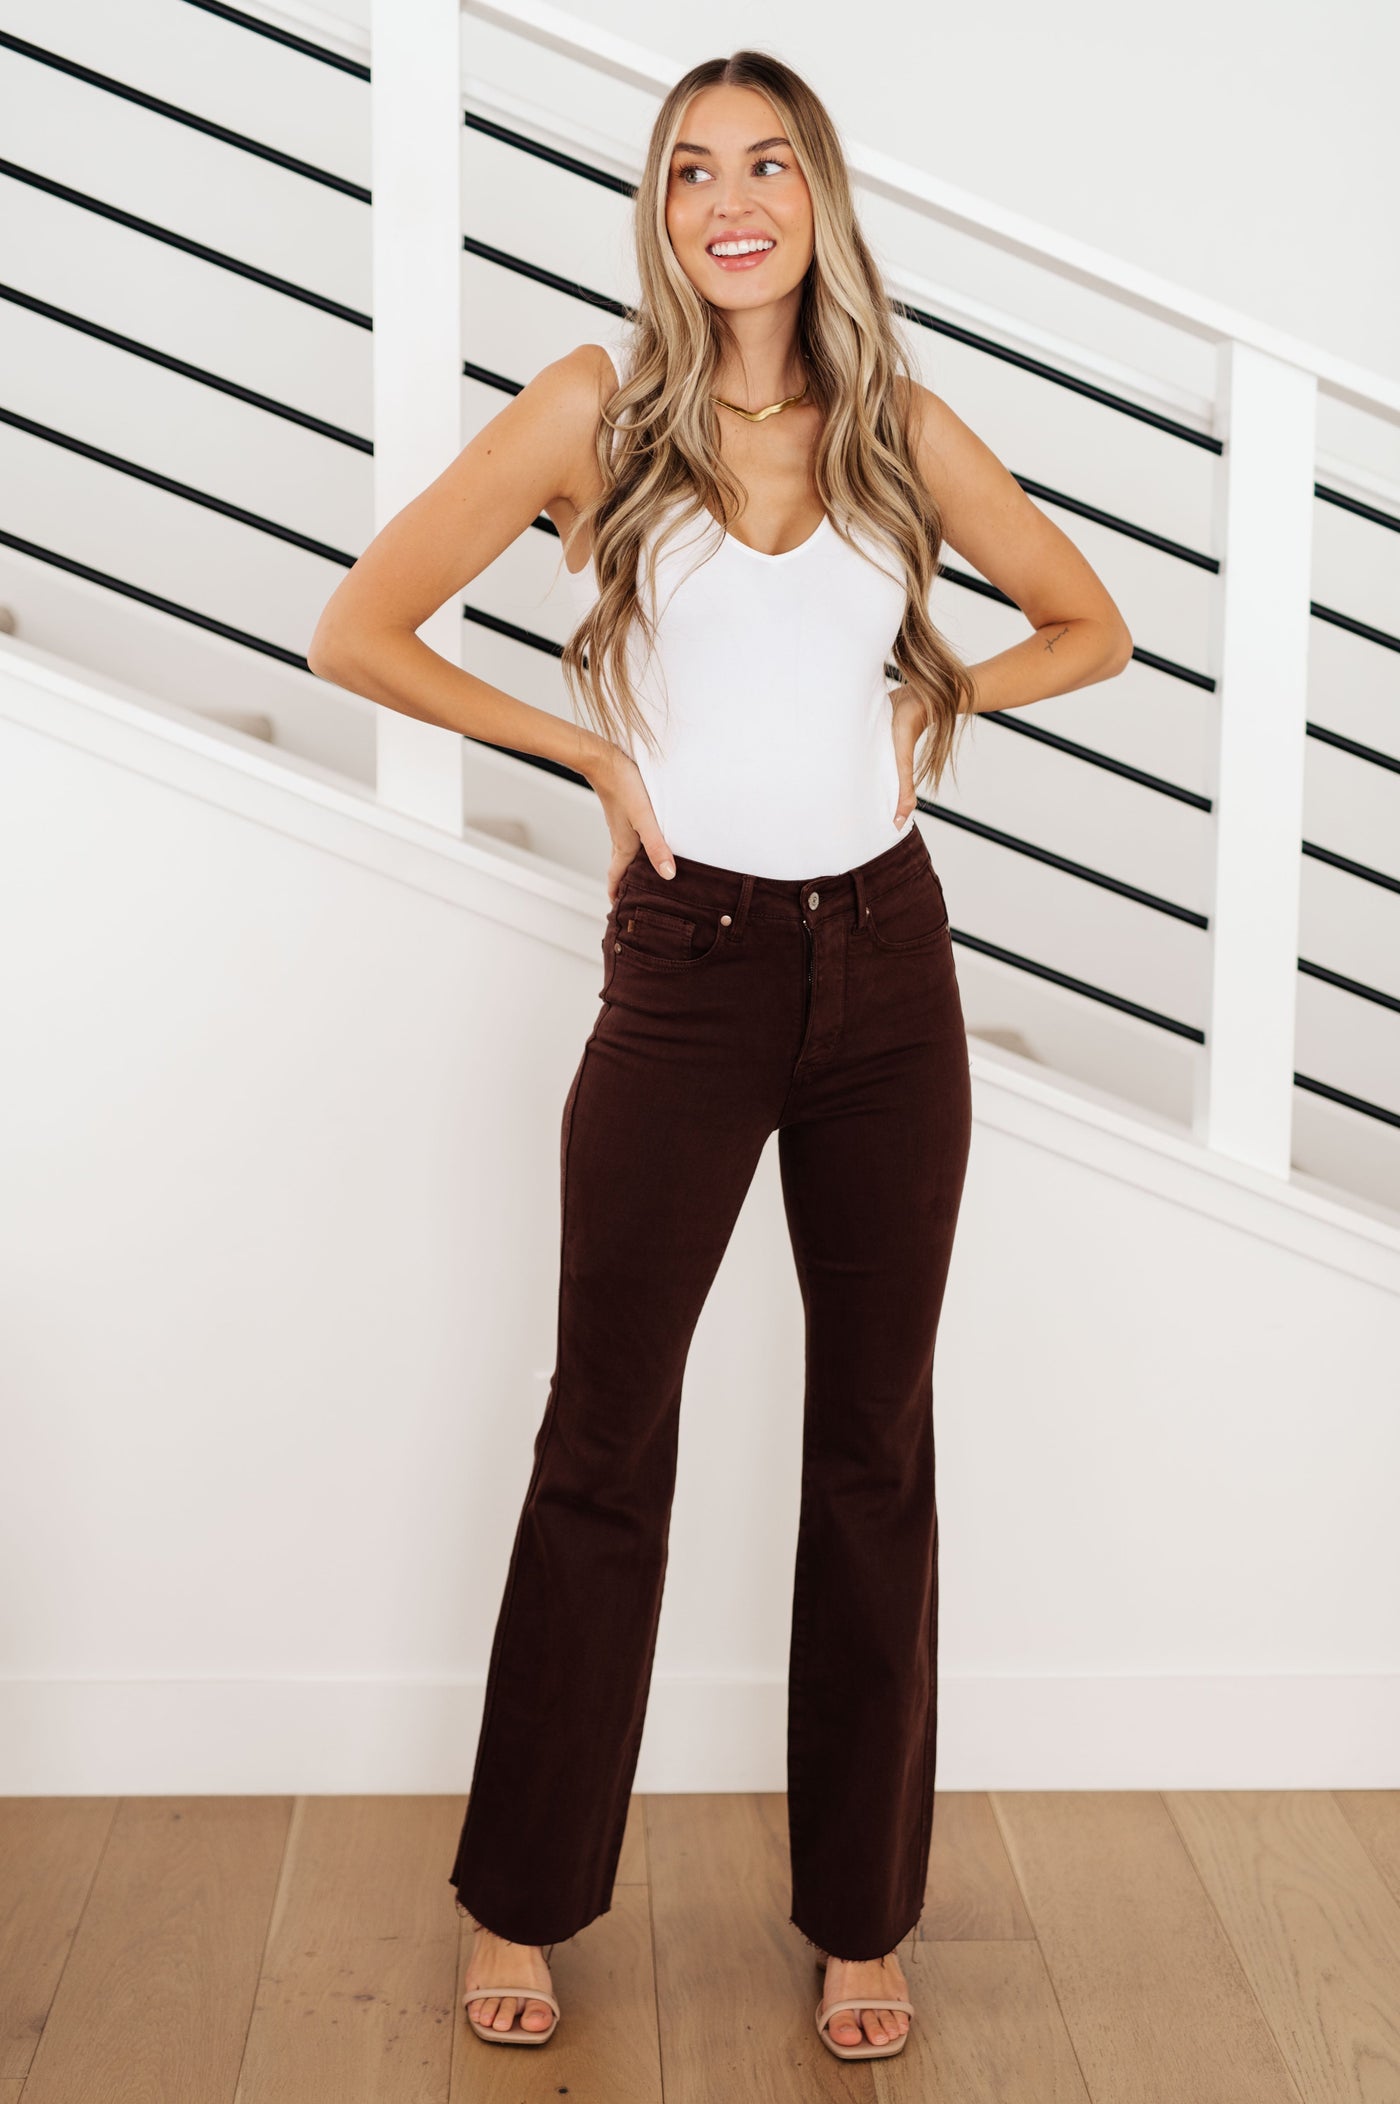 Our Sienna High Rise Control Top Flare Jeans ifrom Judy Blue look as great as they feelOur Sienna High Rise Control Top Flare Jeans ifrom Judy Blue look as great as they feel. Enjoy the garment-dyed espresso brown coloring and the tummy control tech to help you look your best